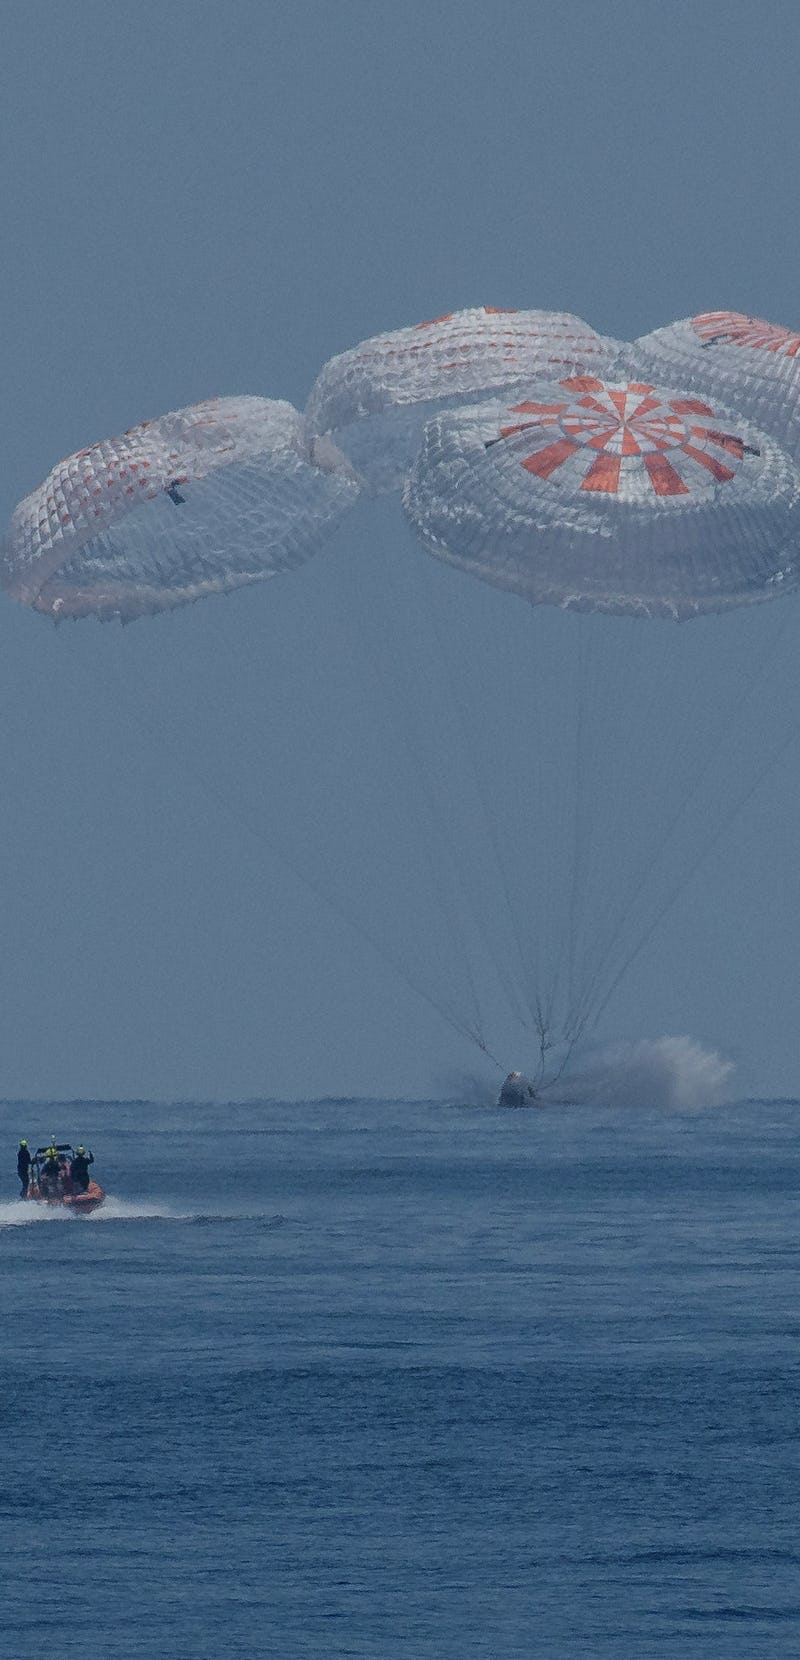 Space X’s Crew Dragon capsule crashing down in the Gulf of Mexico with the help of parachutes